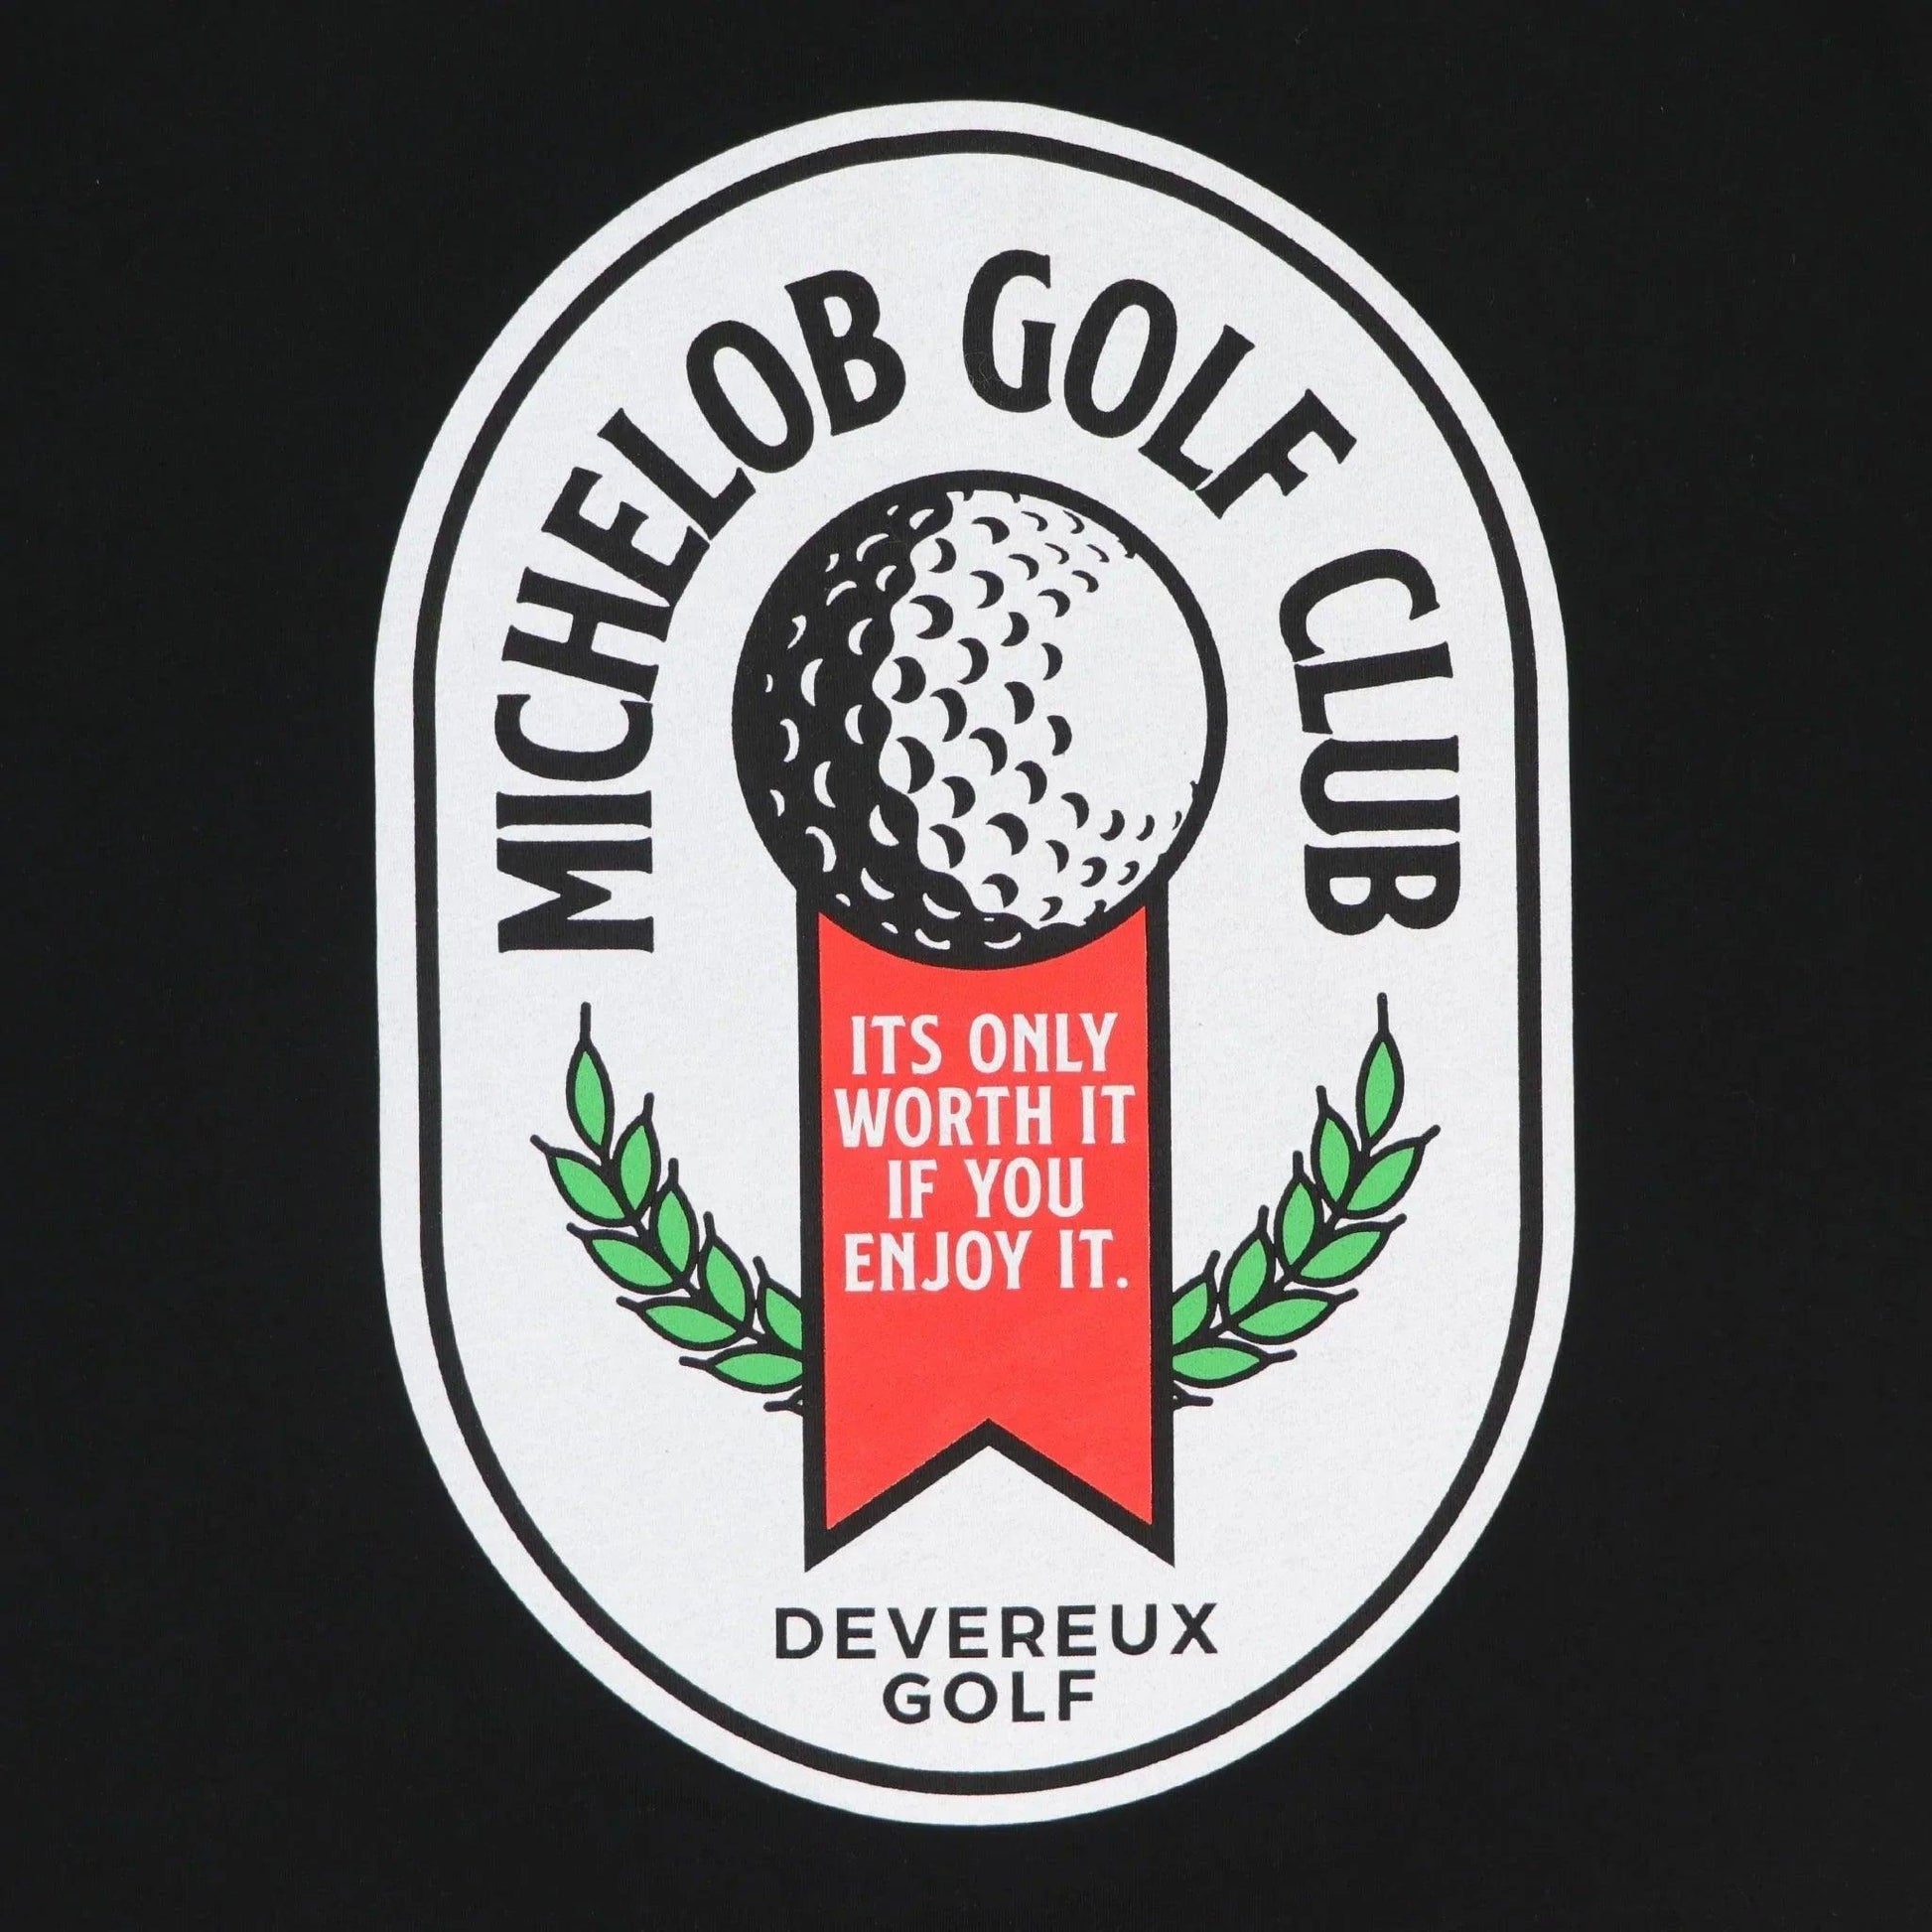 Close up of back logo with golf ball with the ribbon its only worth it if you enjoy it and devereaux golf.